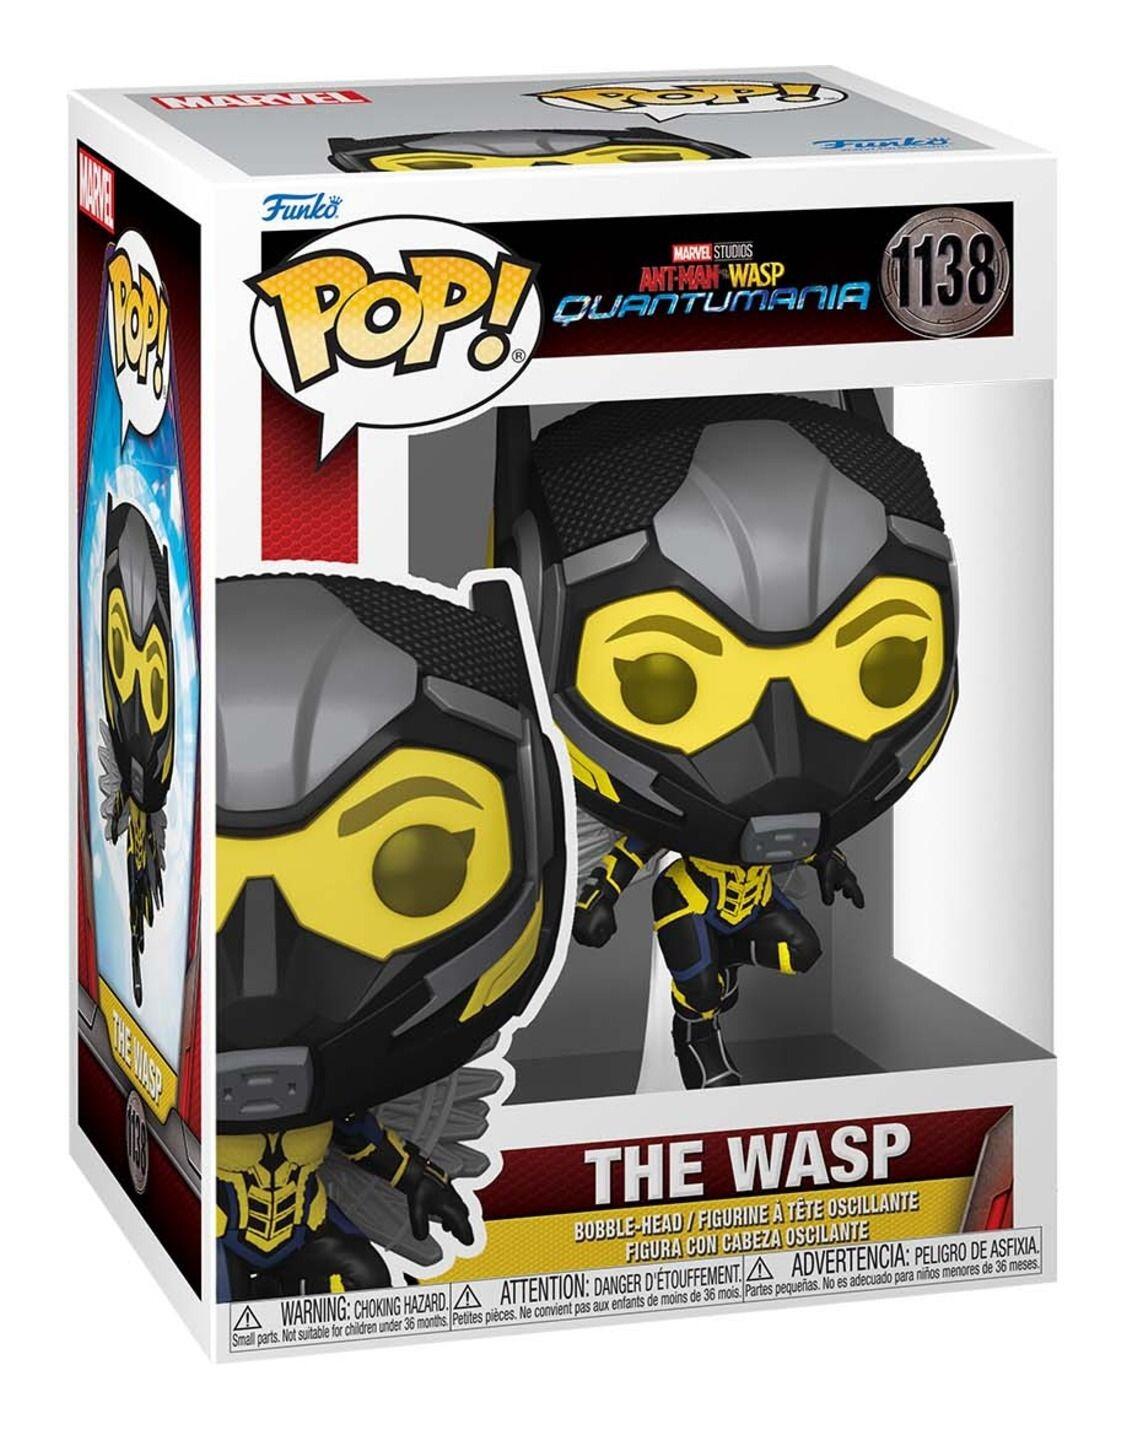 Funko Pop! Marvel Ant-Man & The Wasp Quantumania - The Wasp 1138